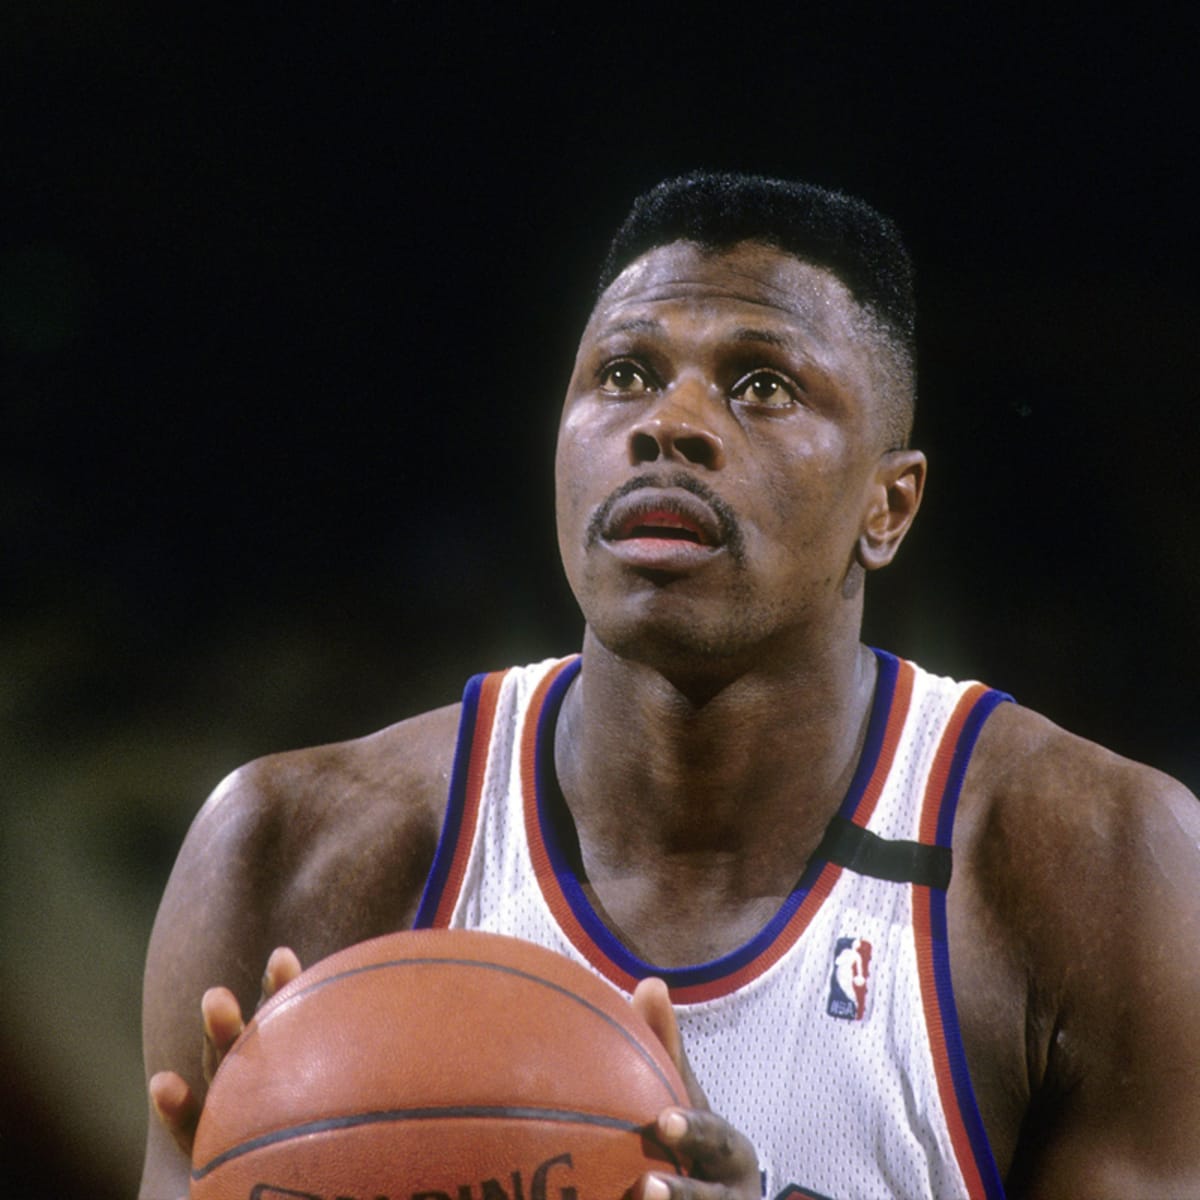 NBA: Patrick Ewing named the greatest New York Knicks player of all time